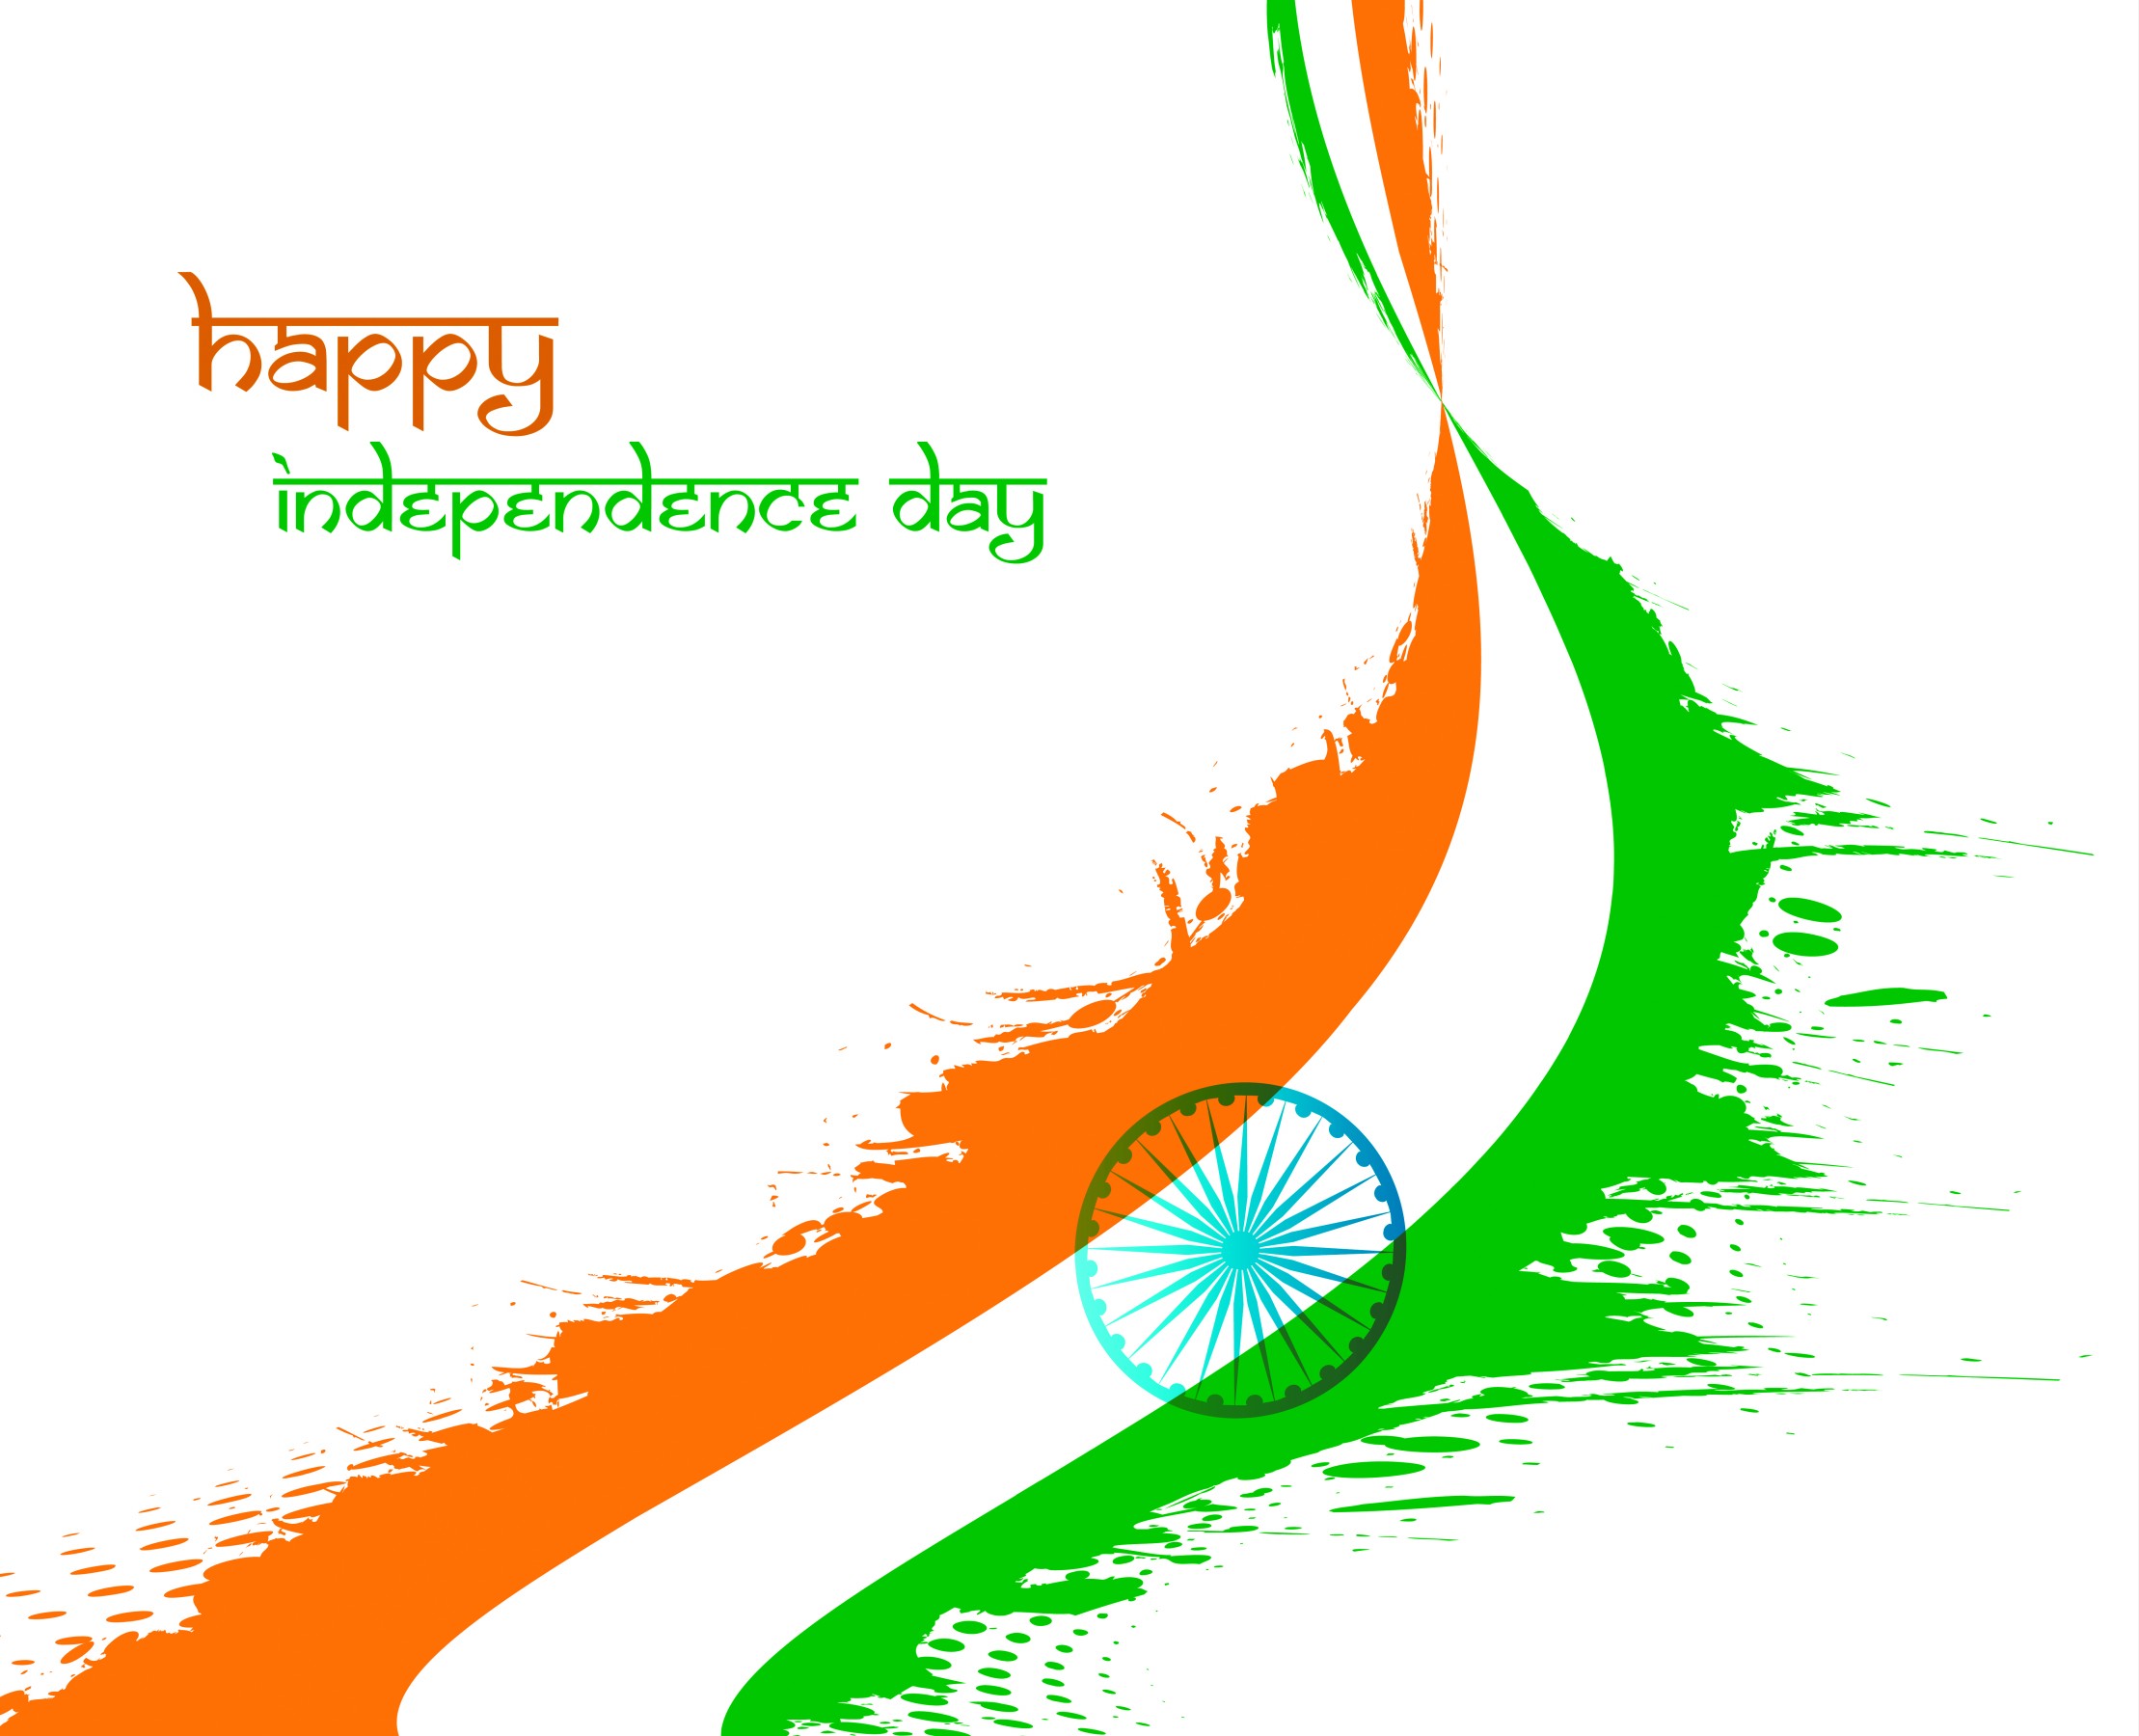 Happy Independence Day Image 2018